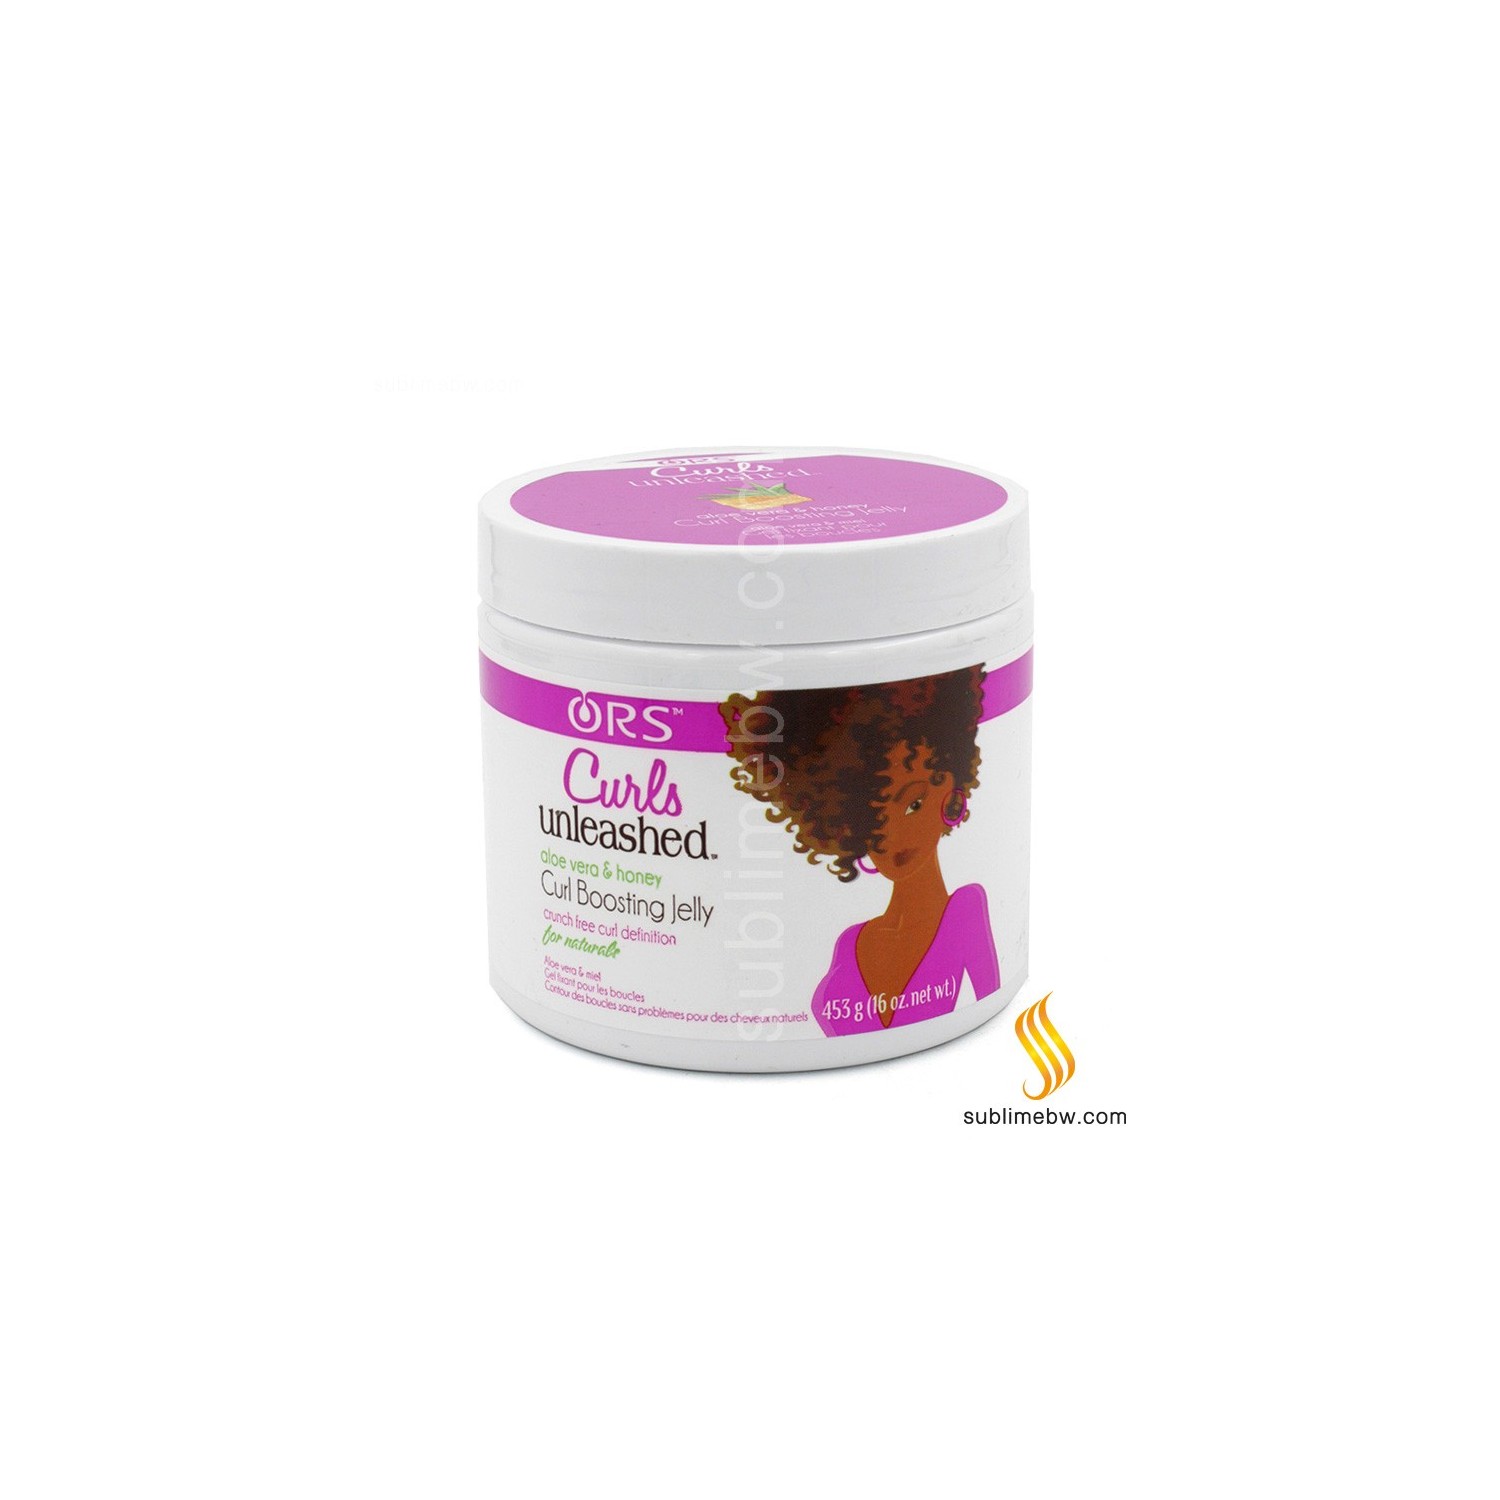 Ors Curls Unleashed Boosting Jelly...